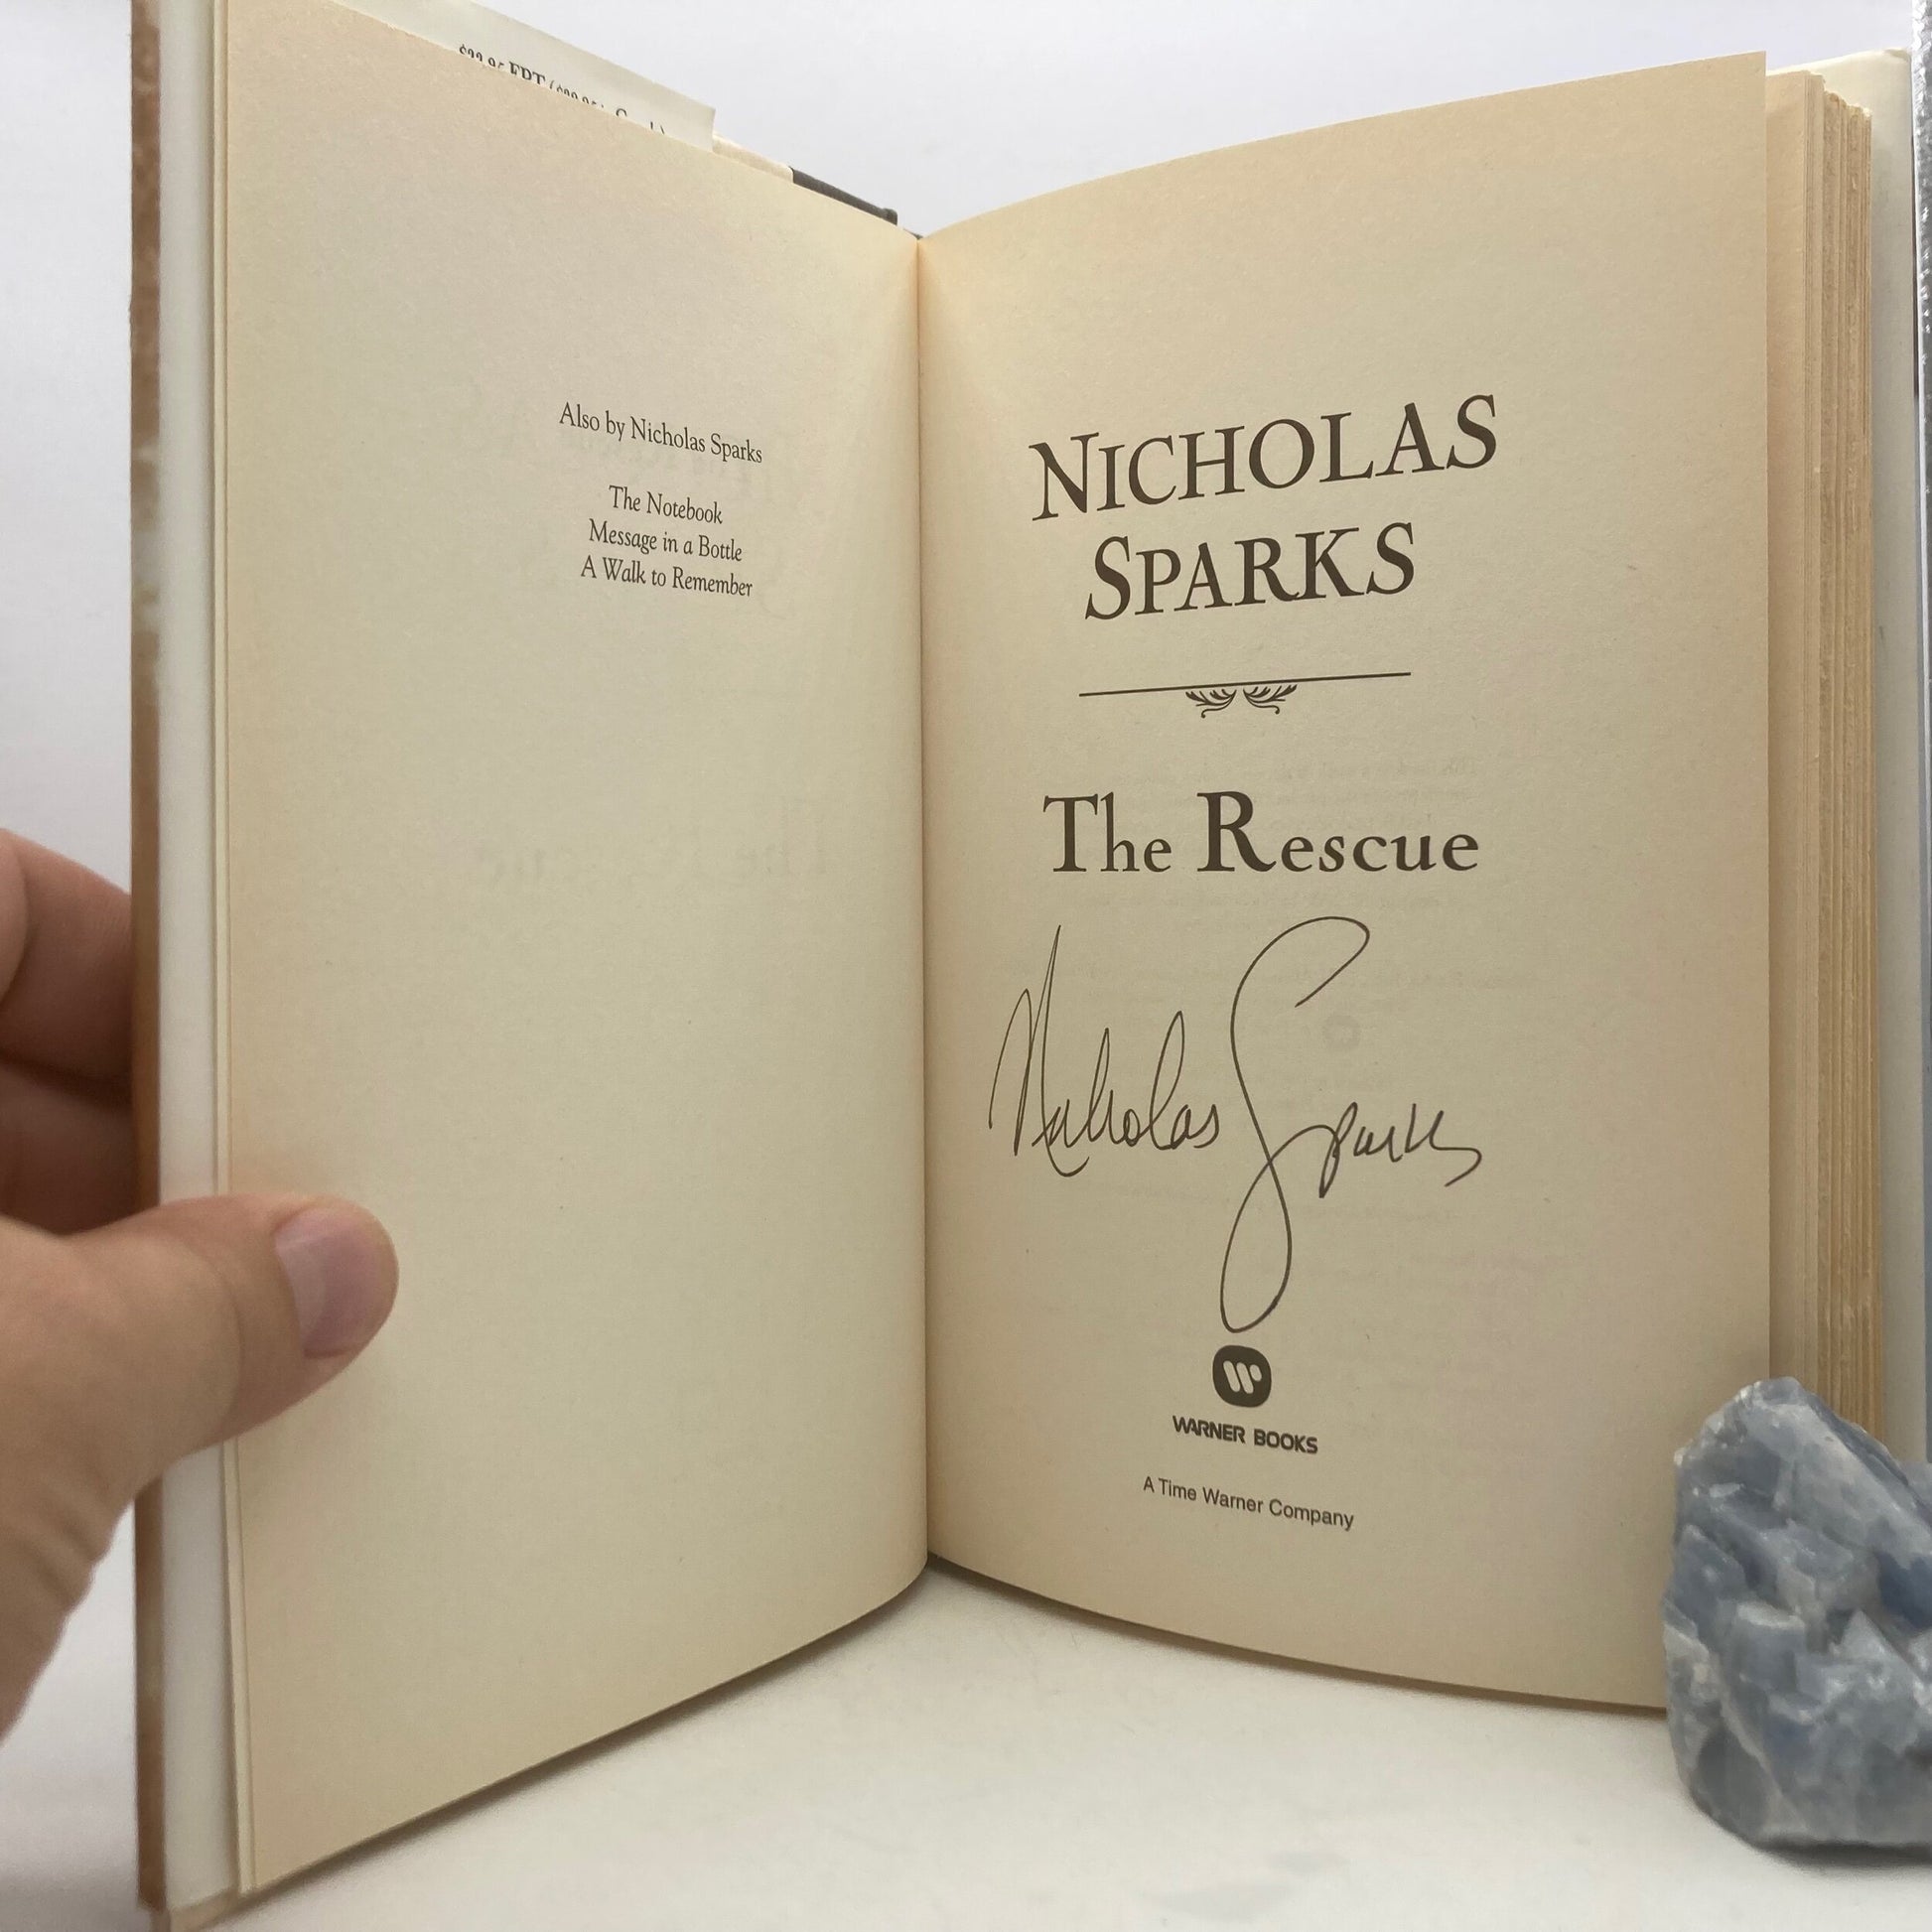 SPARKS, Nicholas "The Rescue" [Warner Books, 2000] 1st Edition (Signed) - Buzz Bookstore